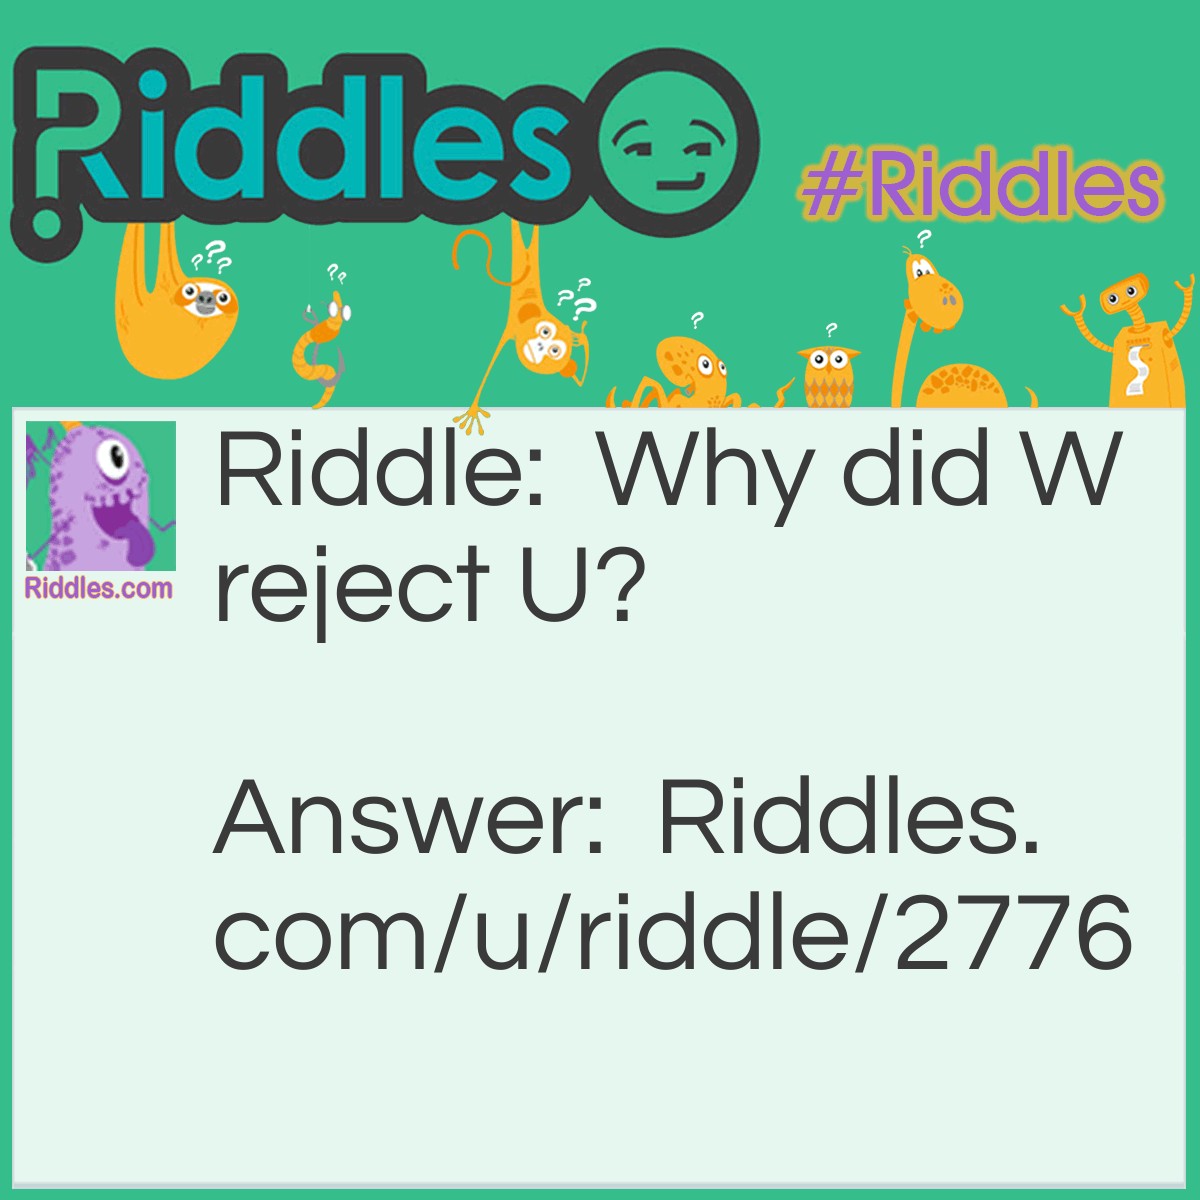 Riddle: Why did W reject U? Answer: Because 3 is a crowd!